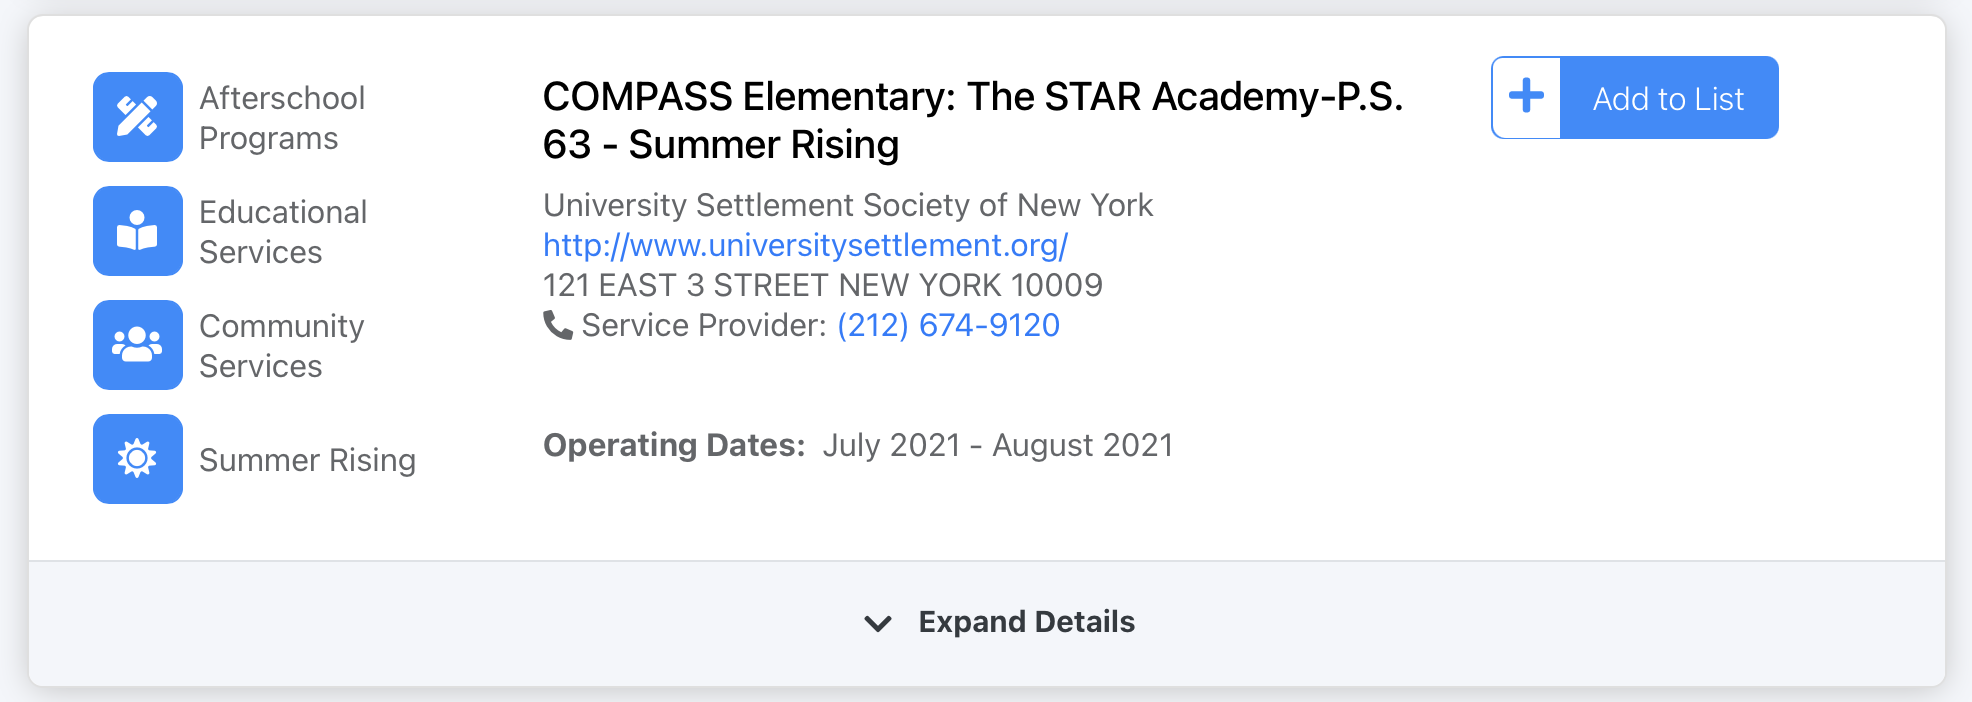 summer rising program information that will come up on the summer rising page